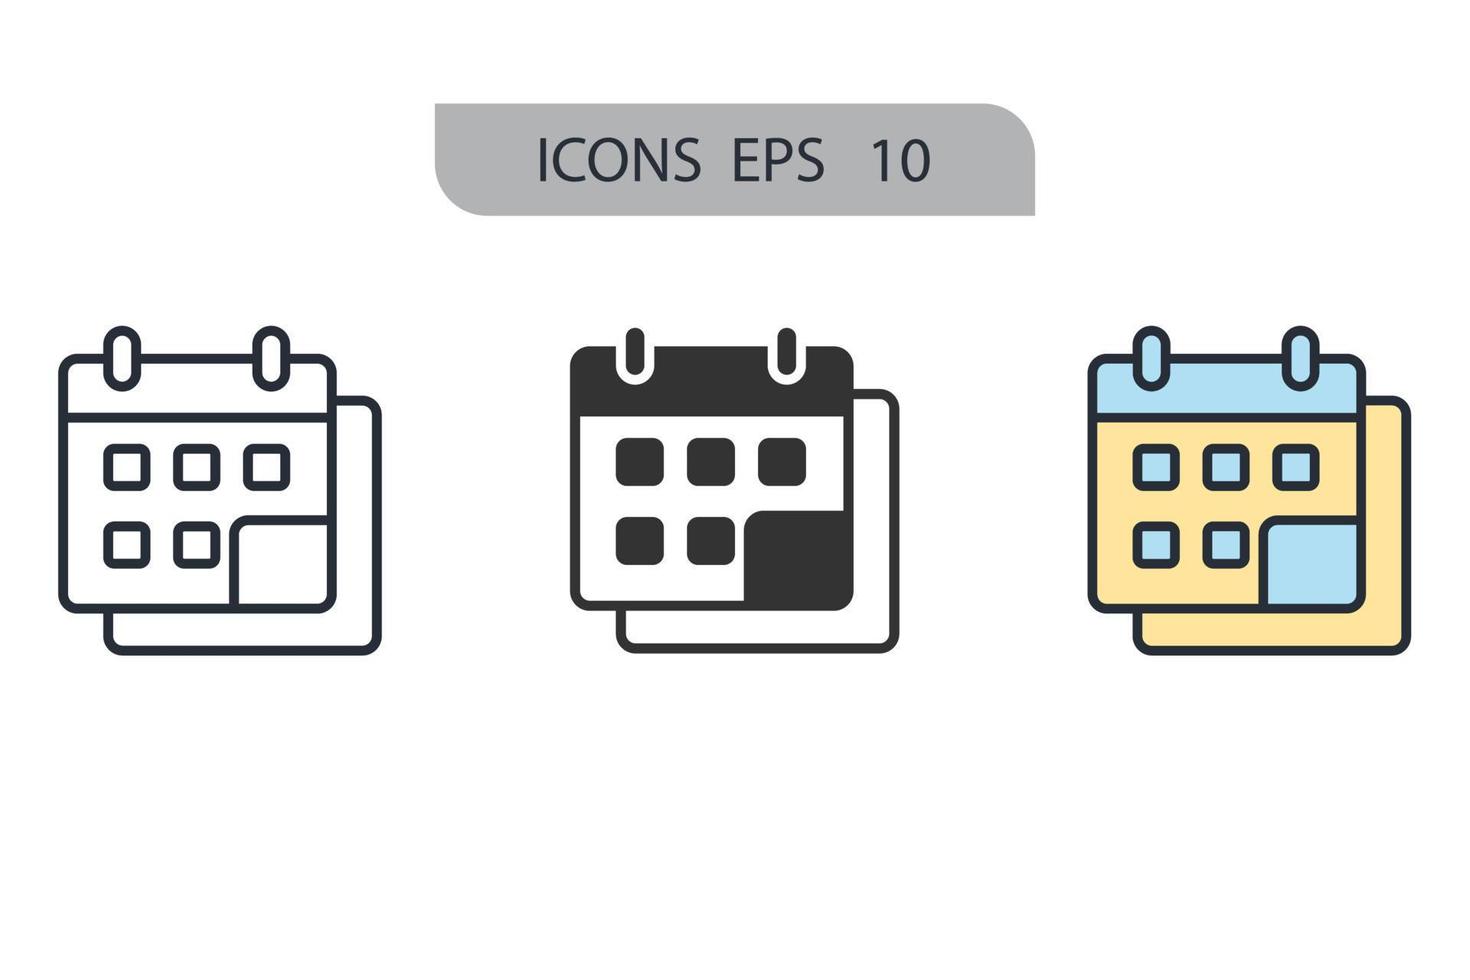 scheduling icons  symbol vector elements for infographic web